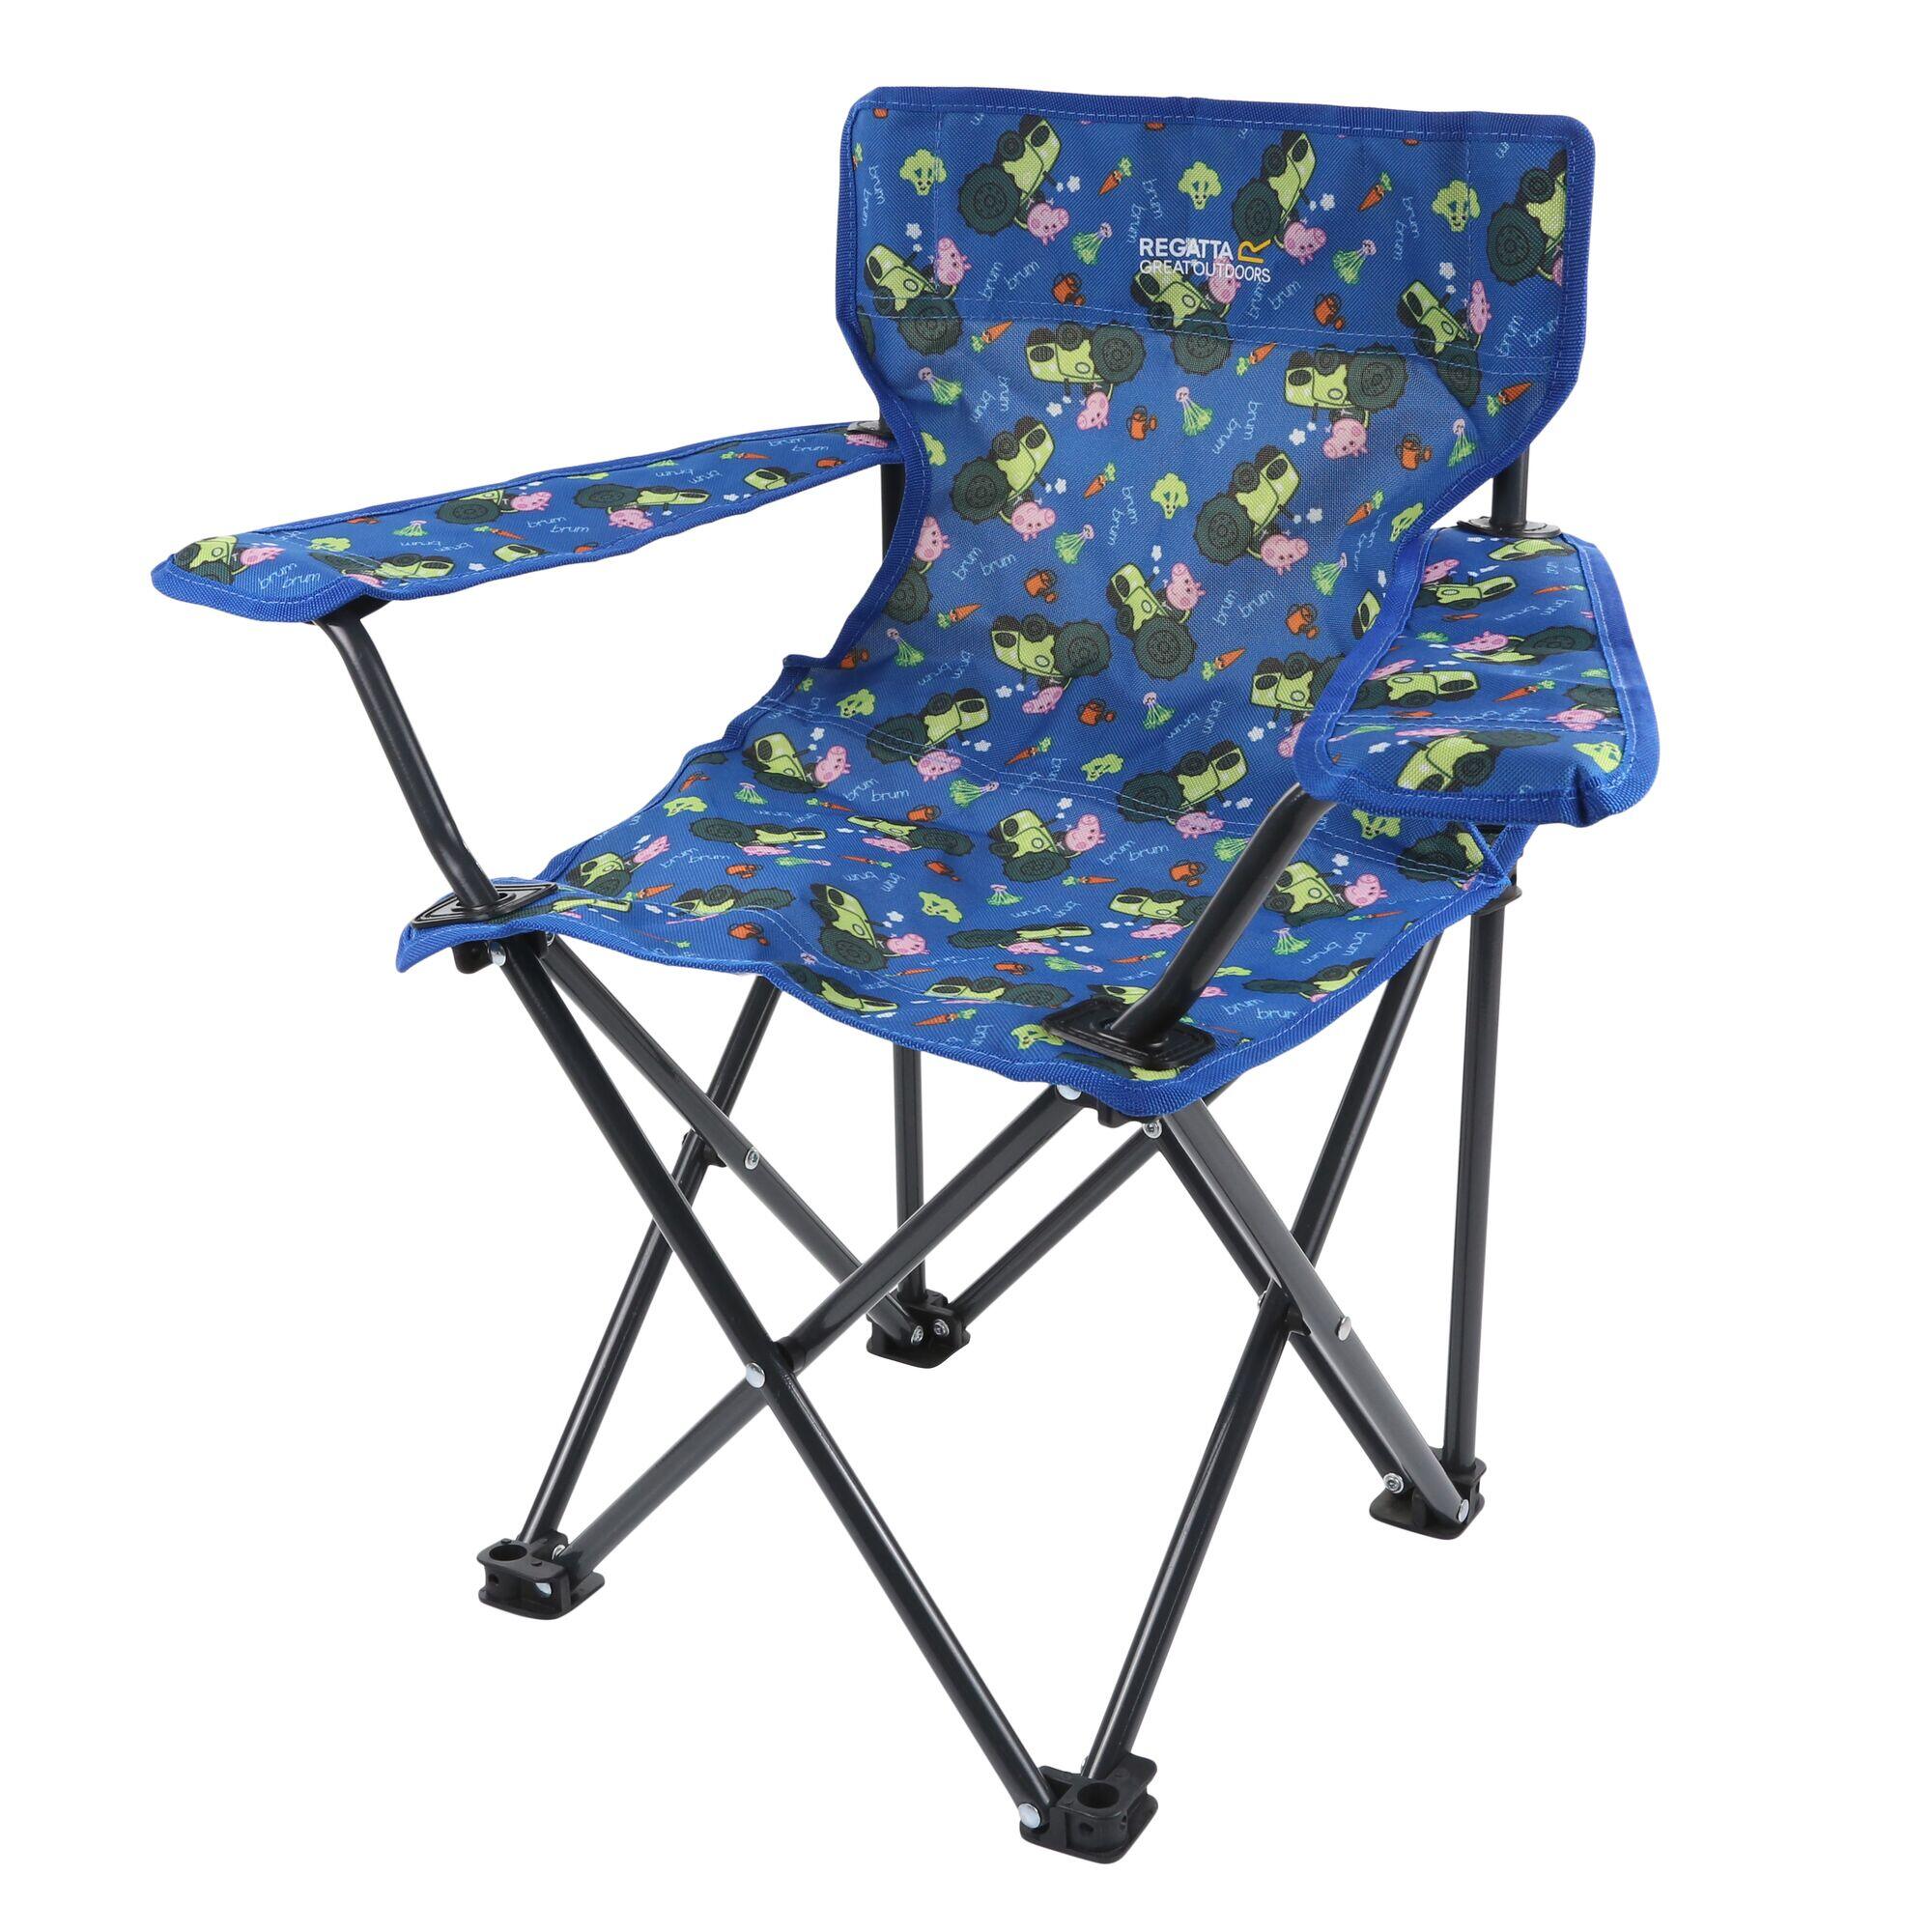 Peppa Pig Kids' Camping Chair - Blue Tractor 2/5